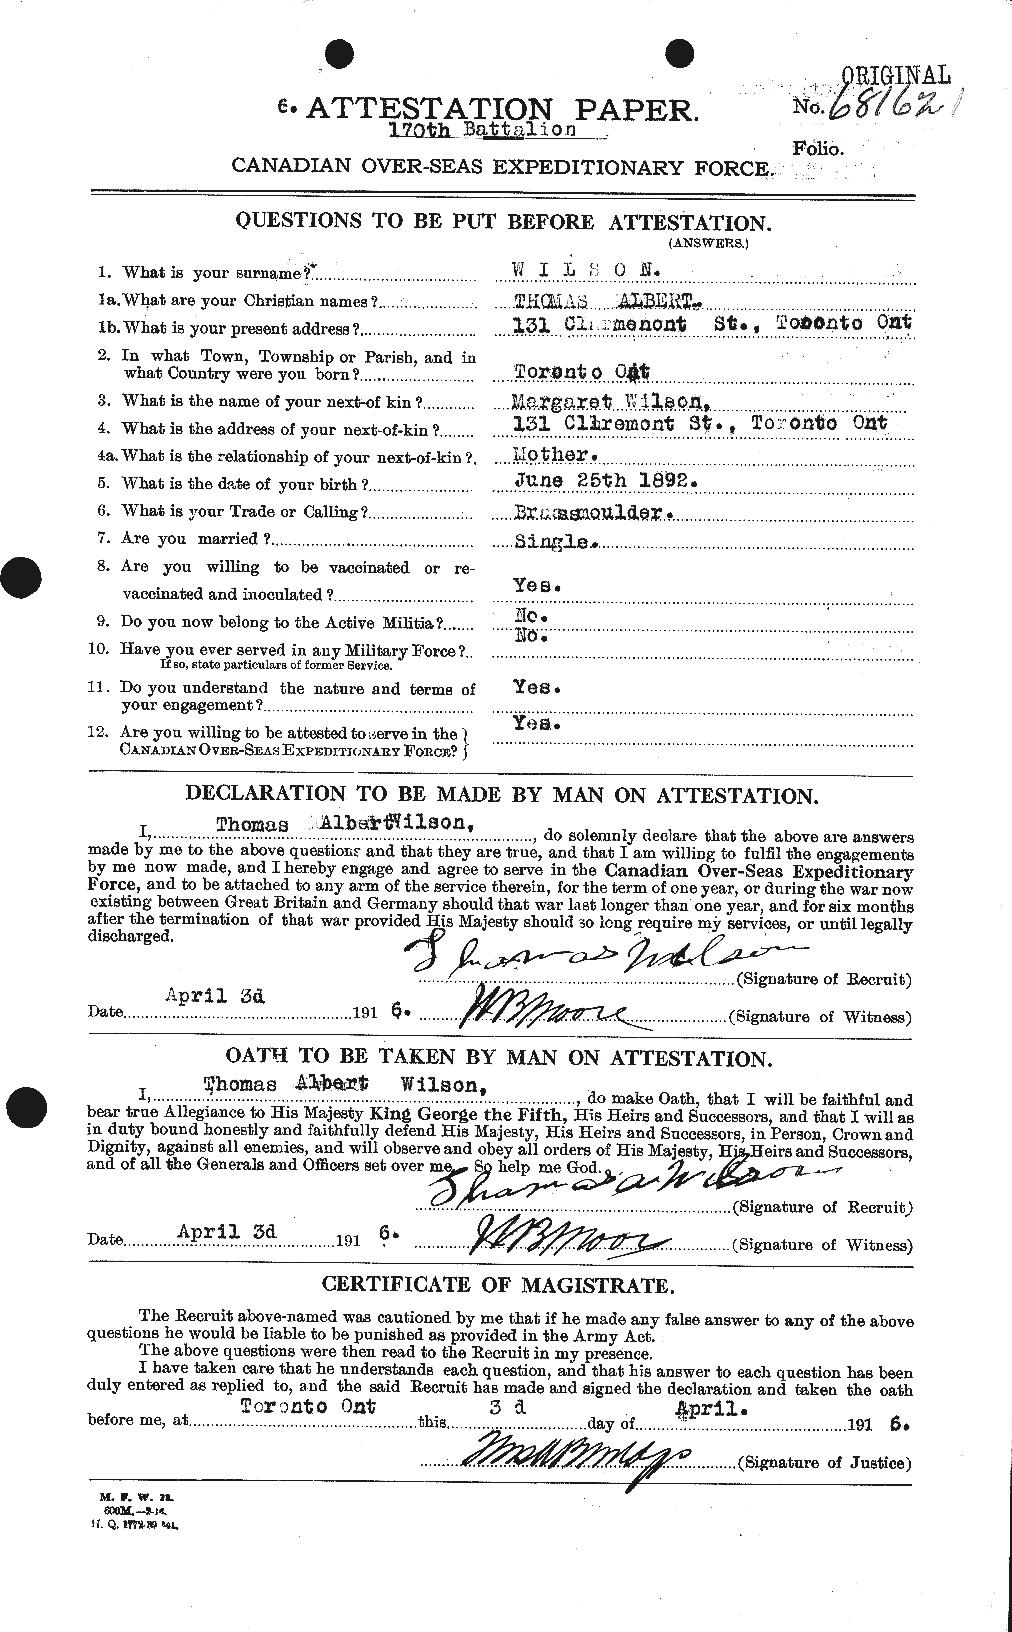 Personnel Records of the First World War - CEF 681228a